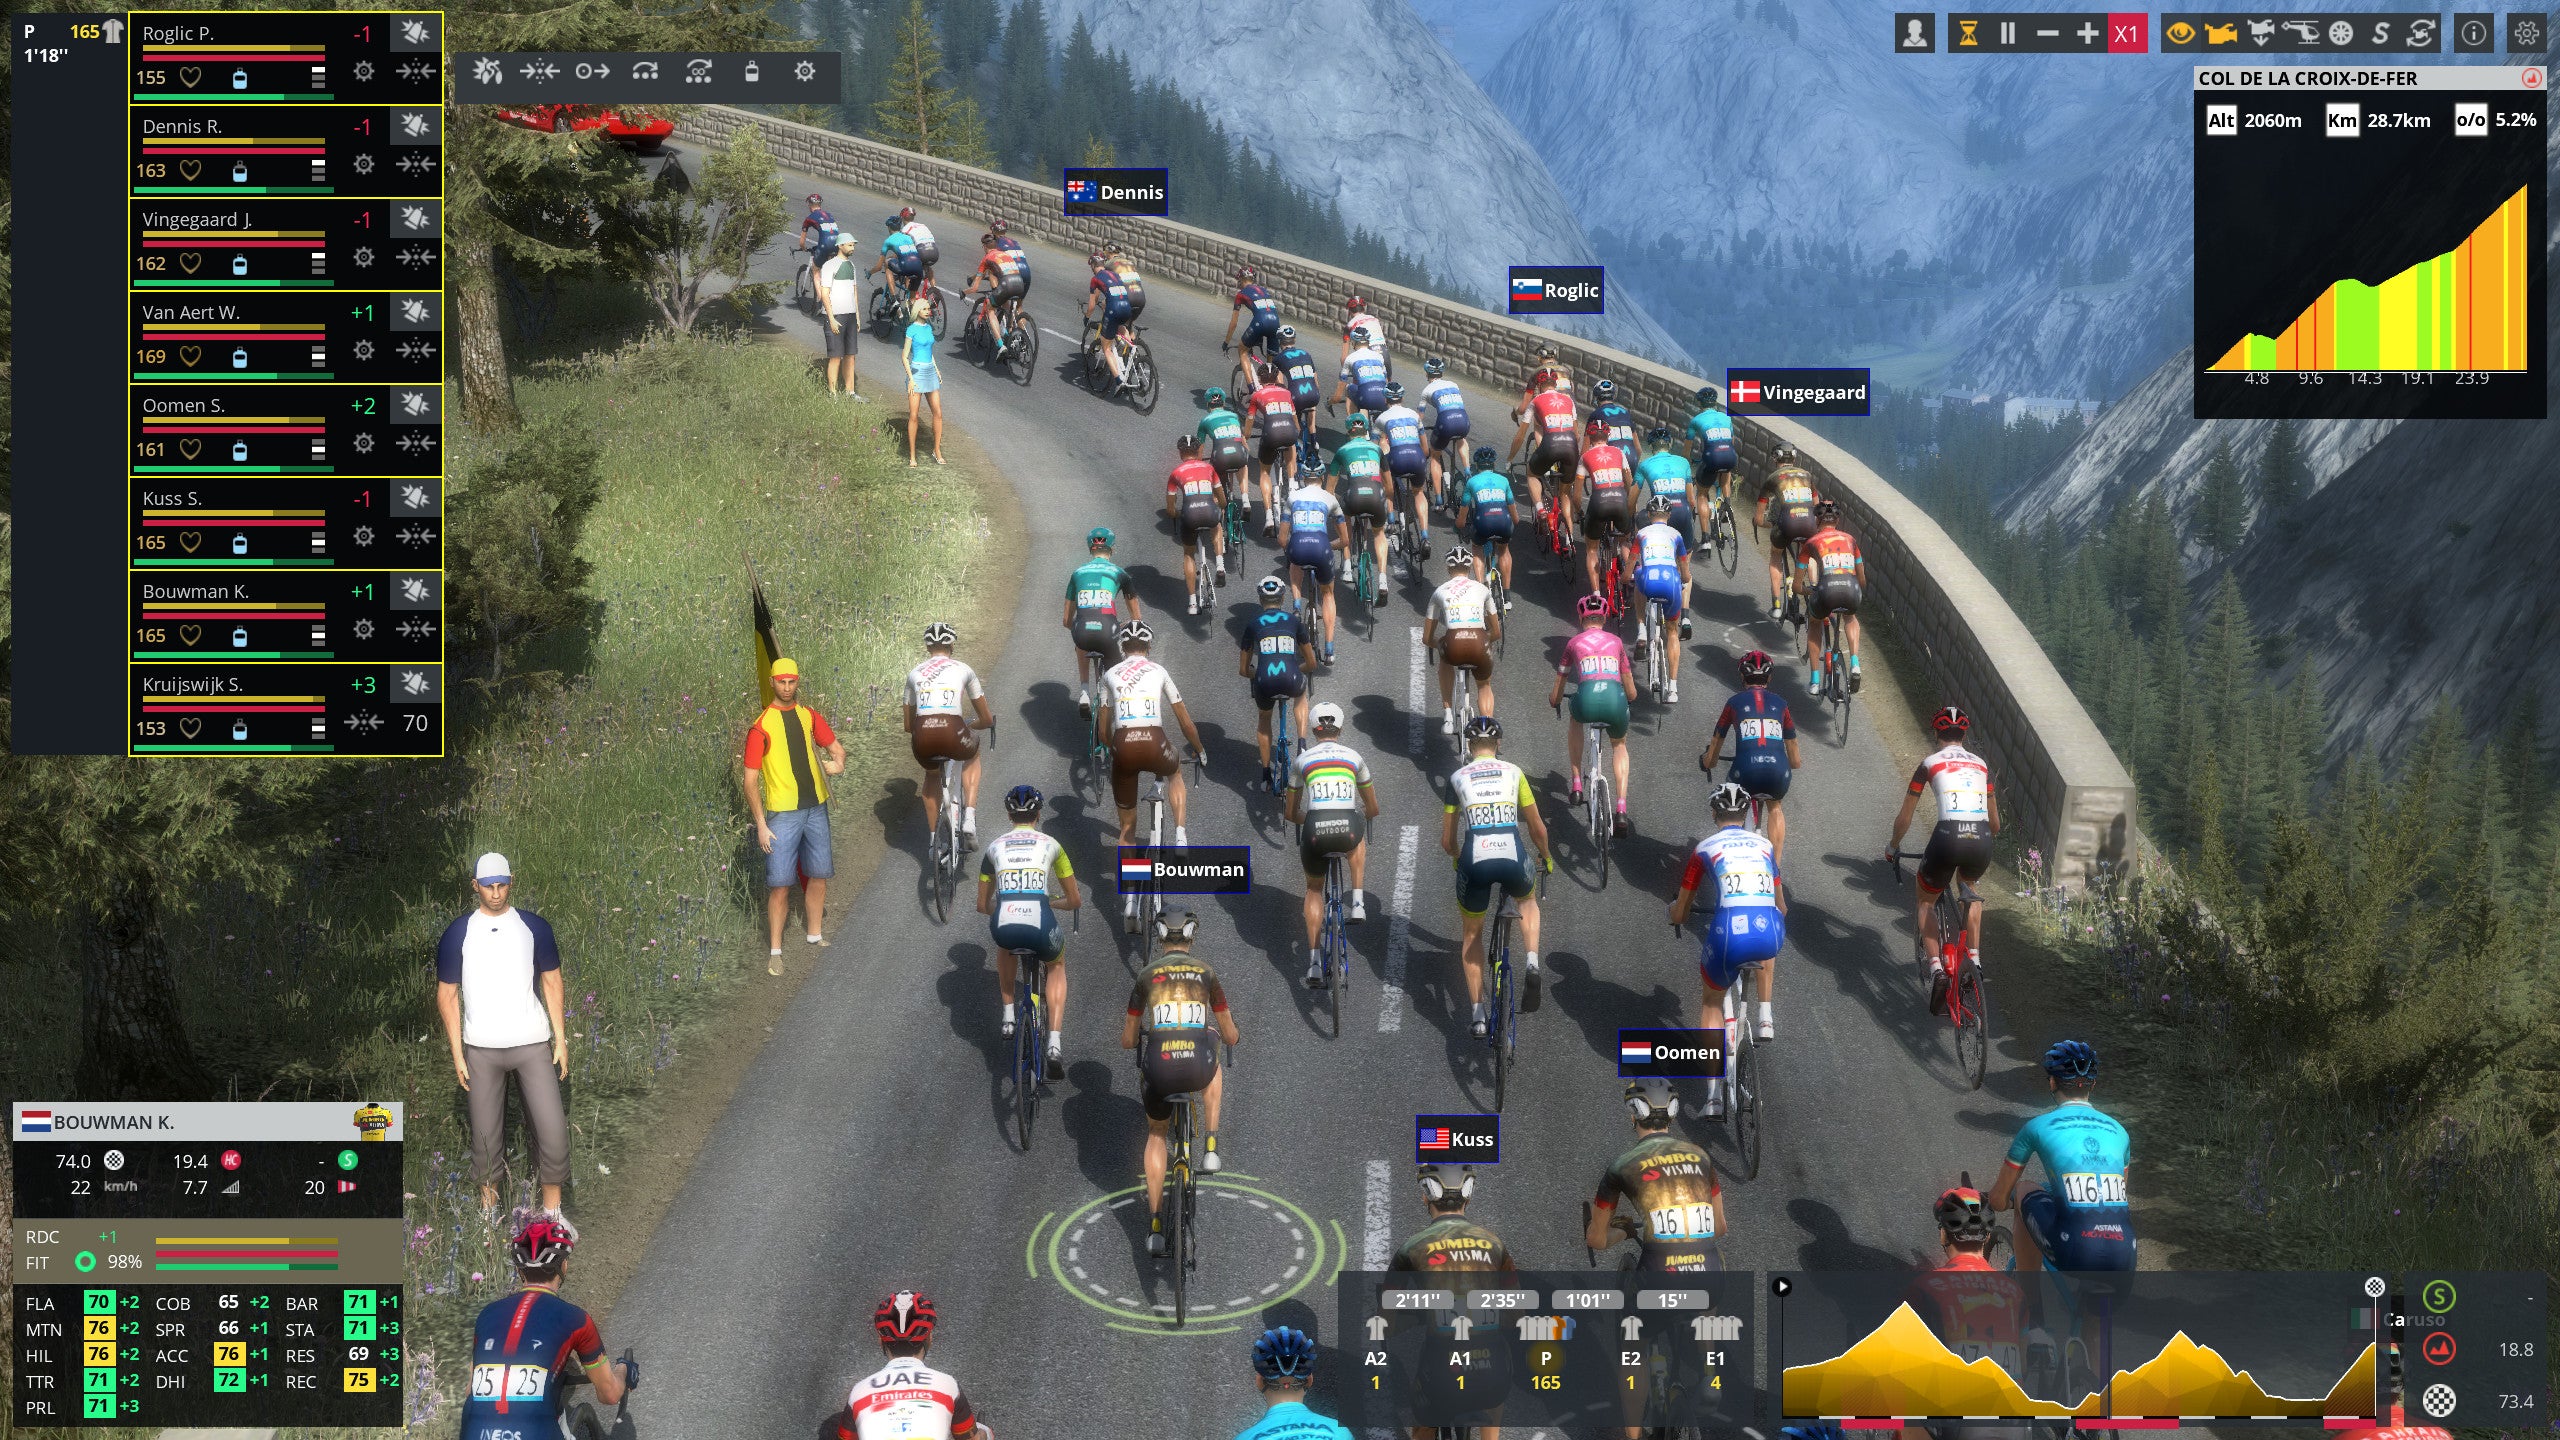 The Tour de France races through the Alps in a Pro Cycling Manager 2022 screenshot.